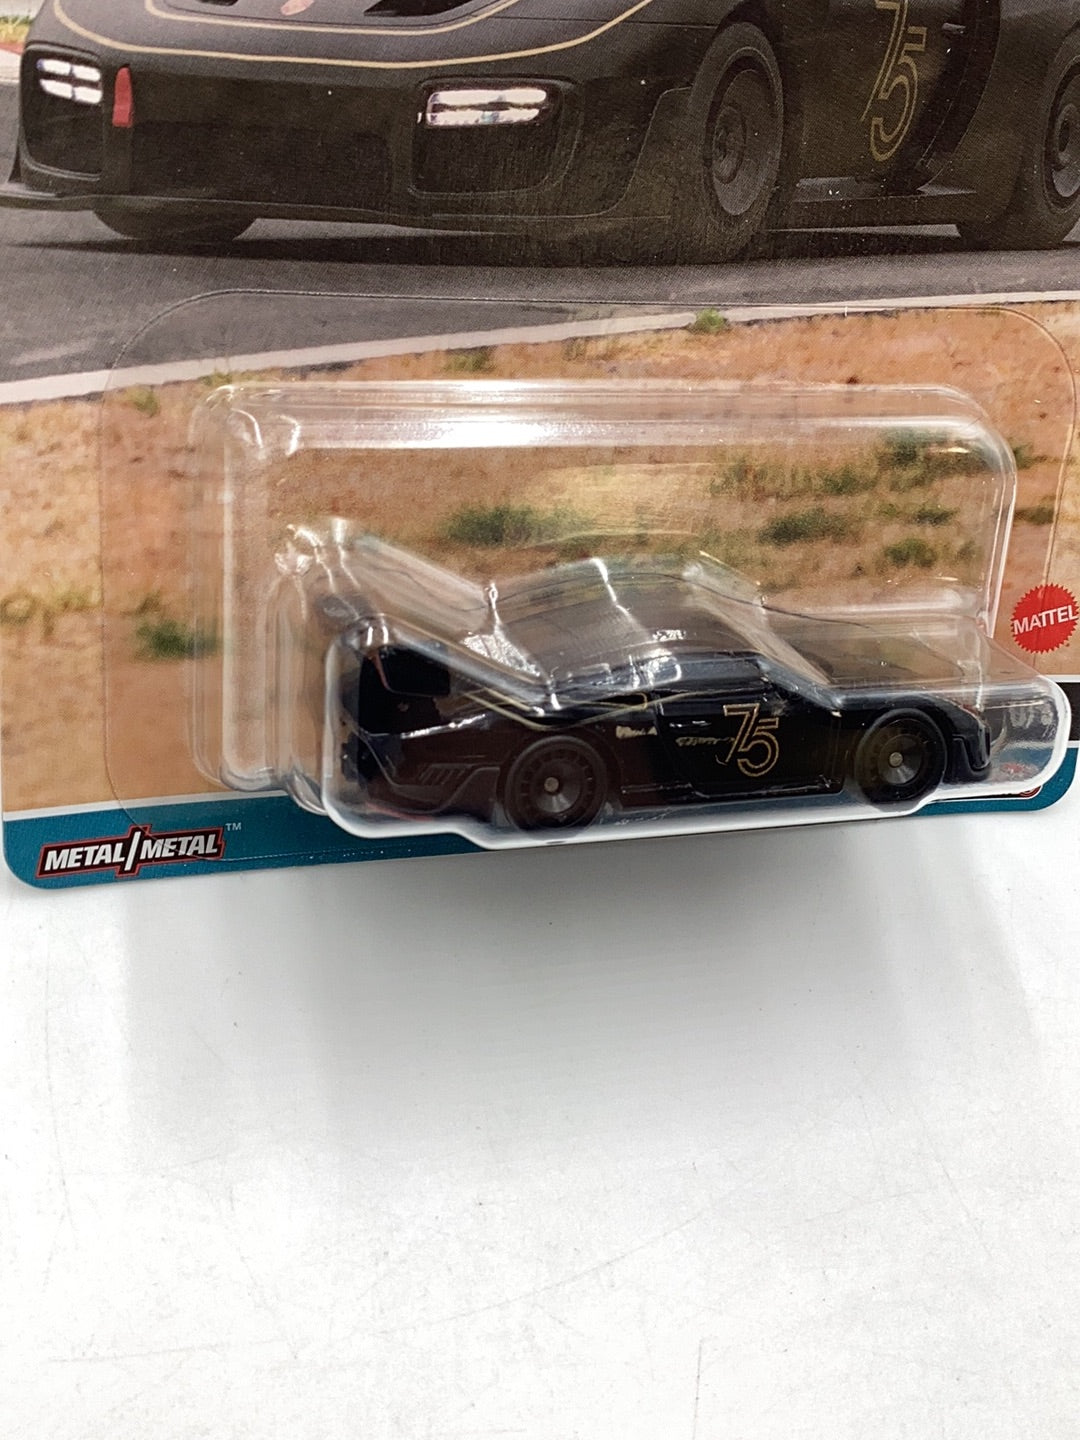 2023 Hot wheels Race Day Chase Porsche 935 0/5 with protector